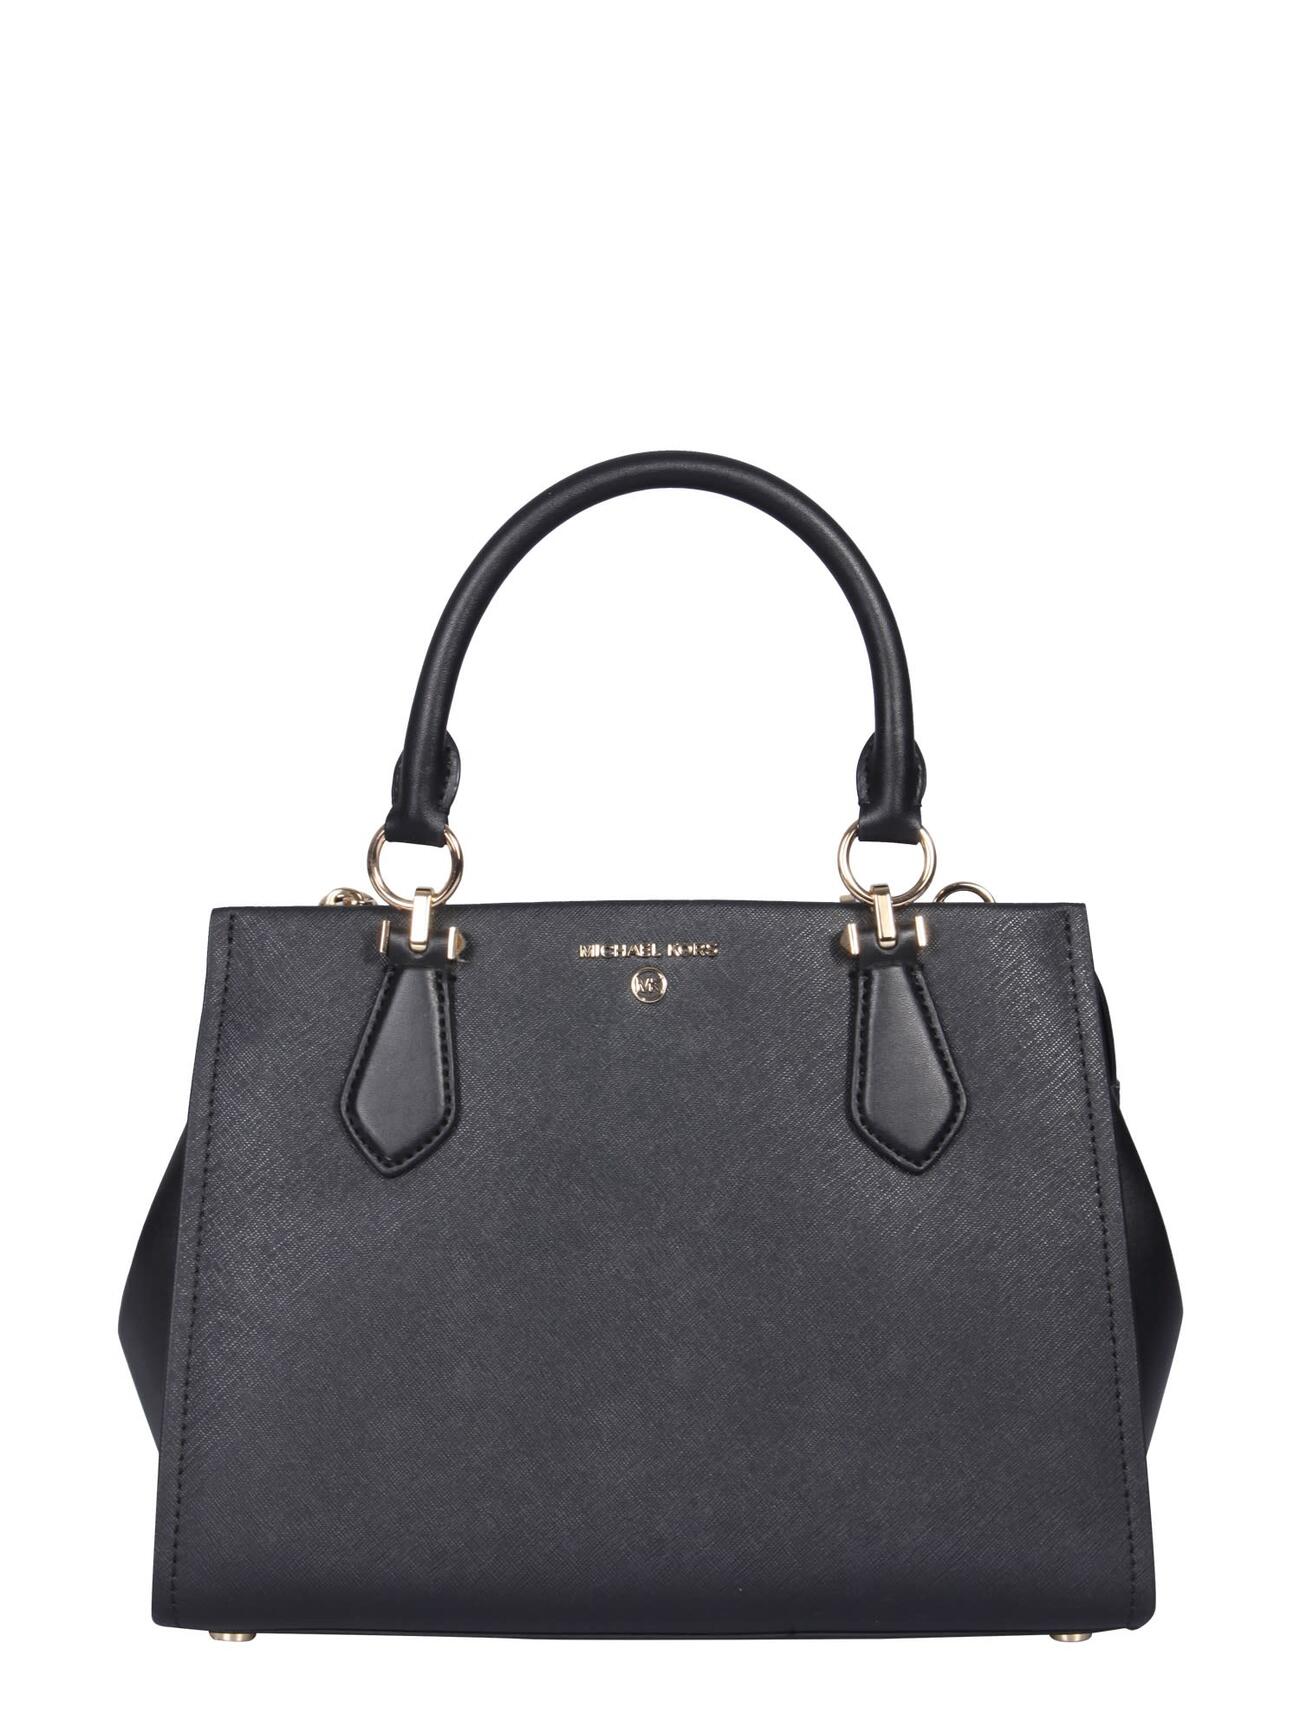 MICHAEL Michael Kors Small Marylin Tote Bag in nero